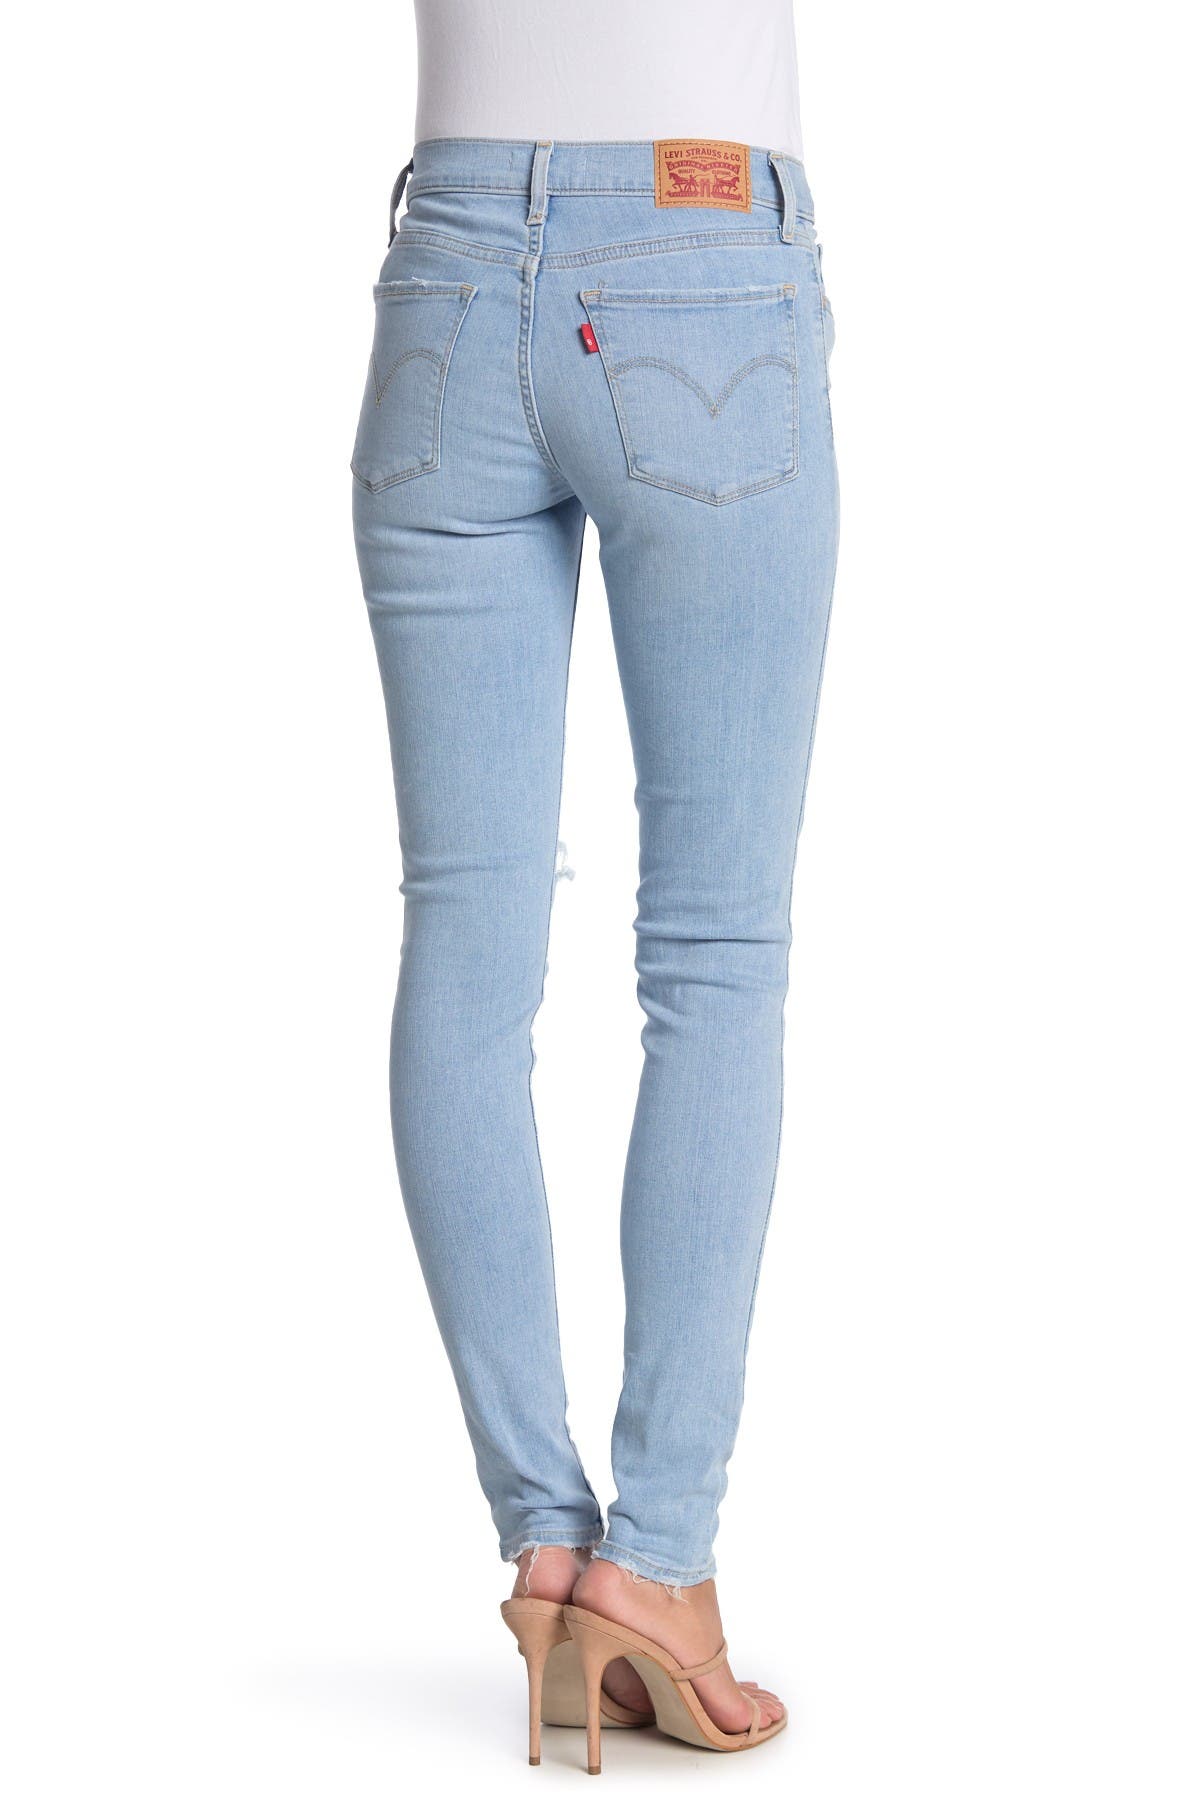 levi's 710 super skinny ripped jeans